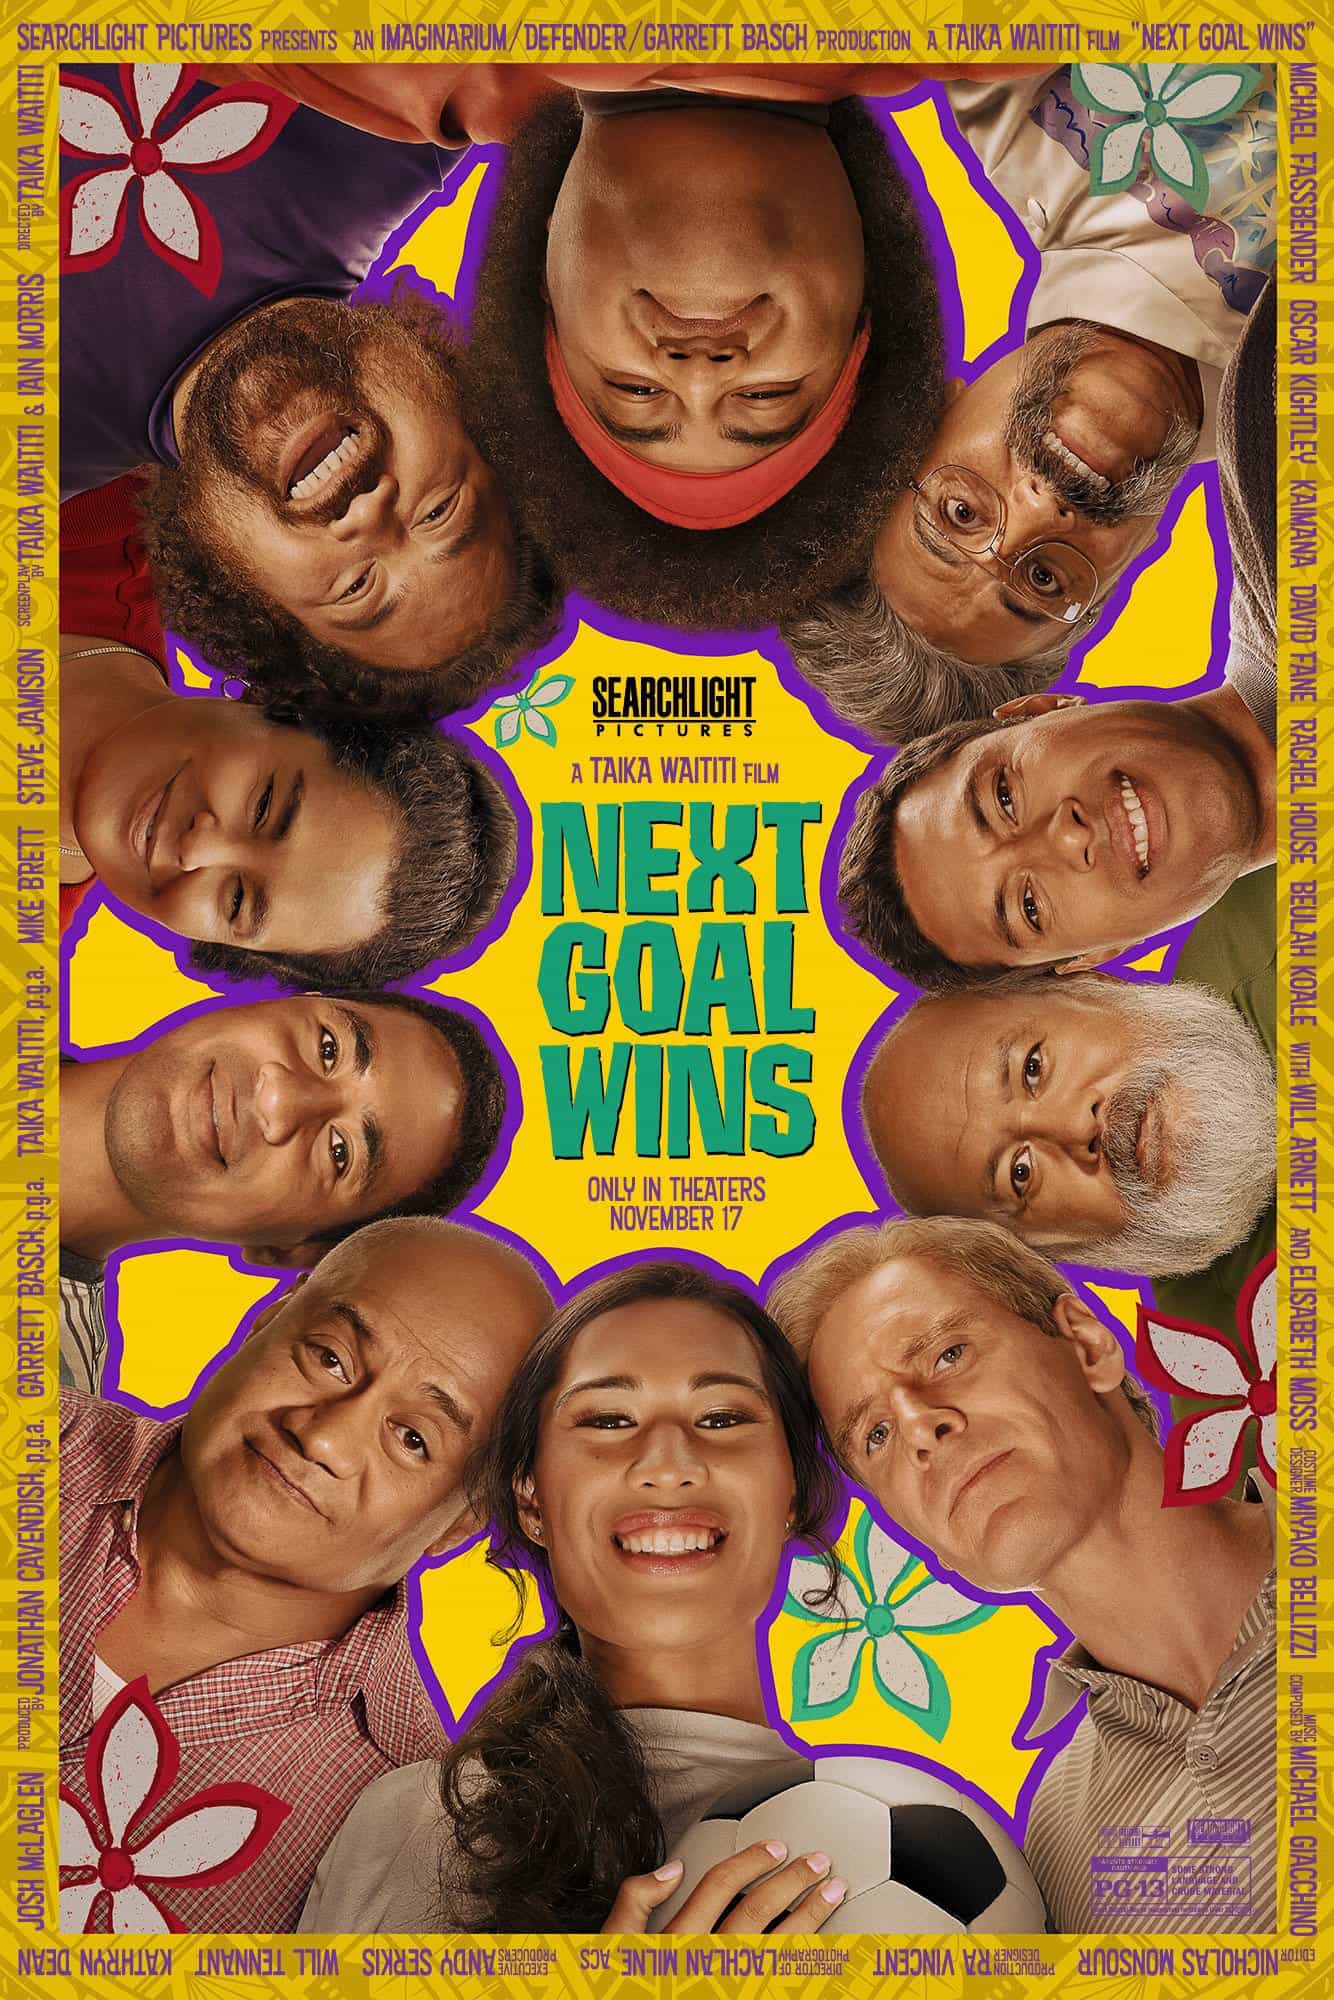 Check out the new trailer for upcoming movie Next Goal Wins which stars Elisabeth Moss and Michael Fassbender - movie UK release date 17th November 2023 #nextgoalwins